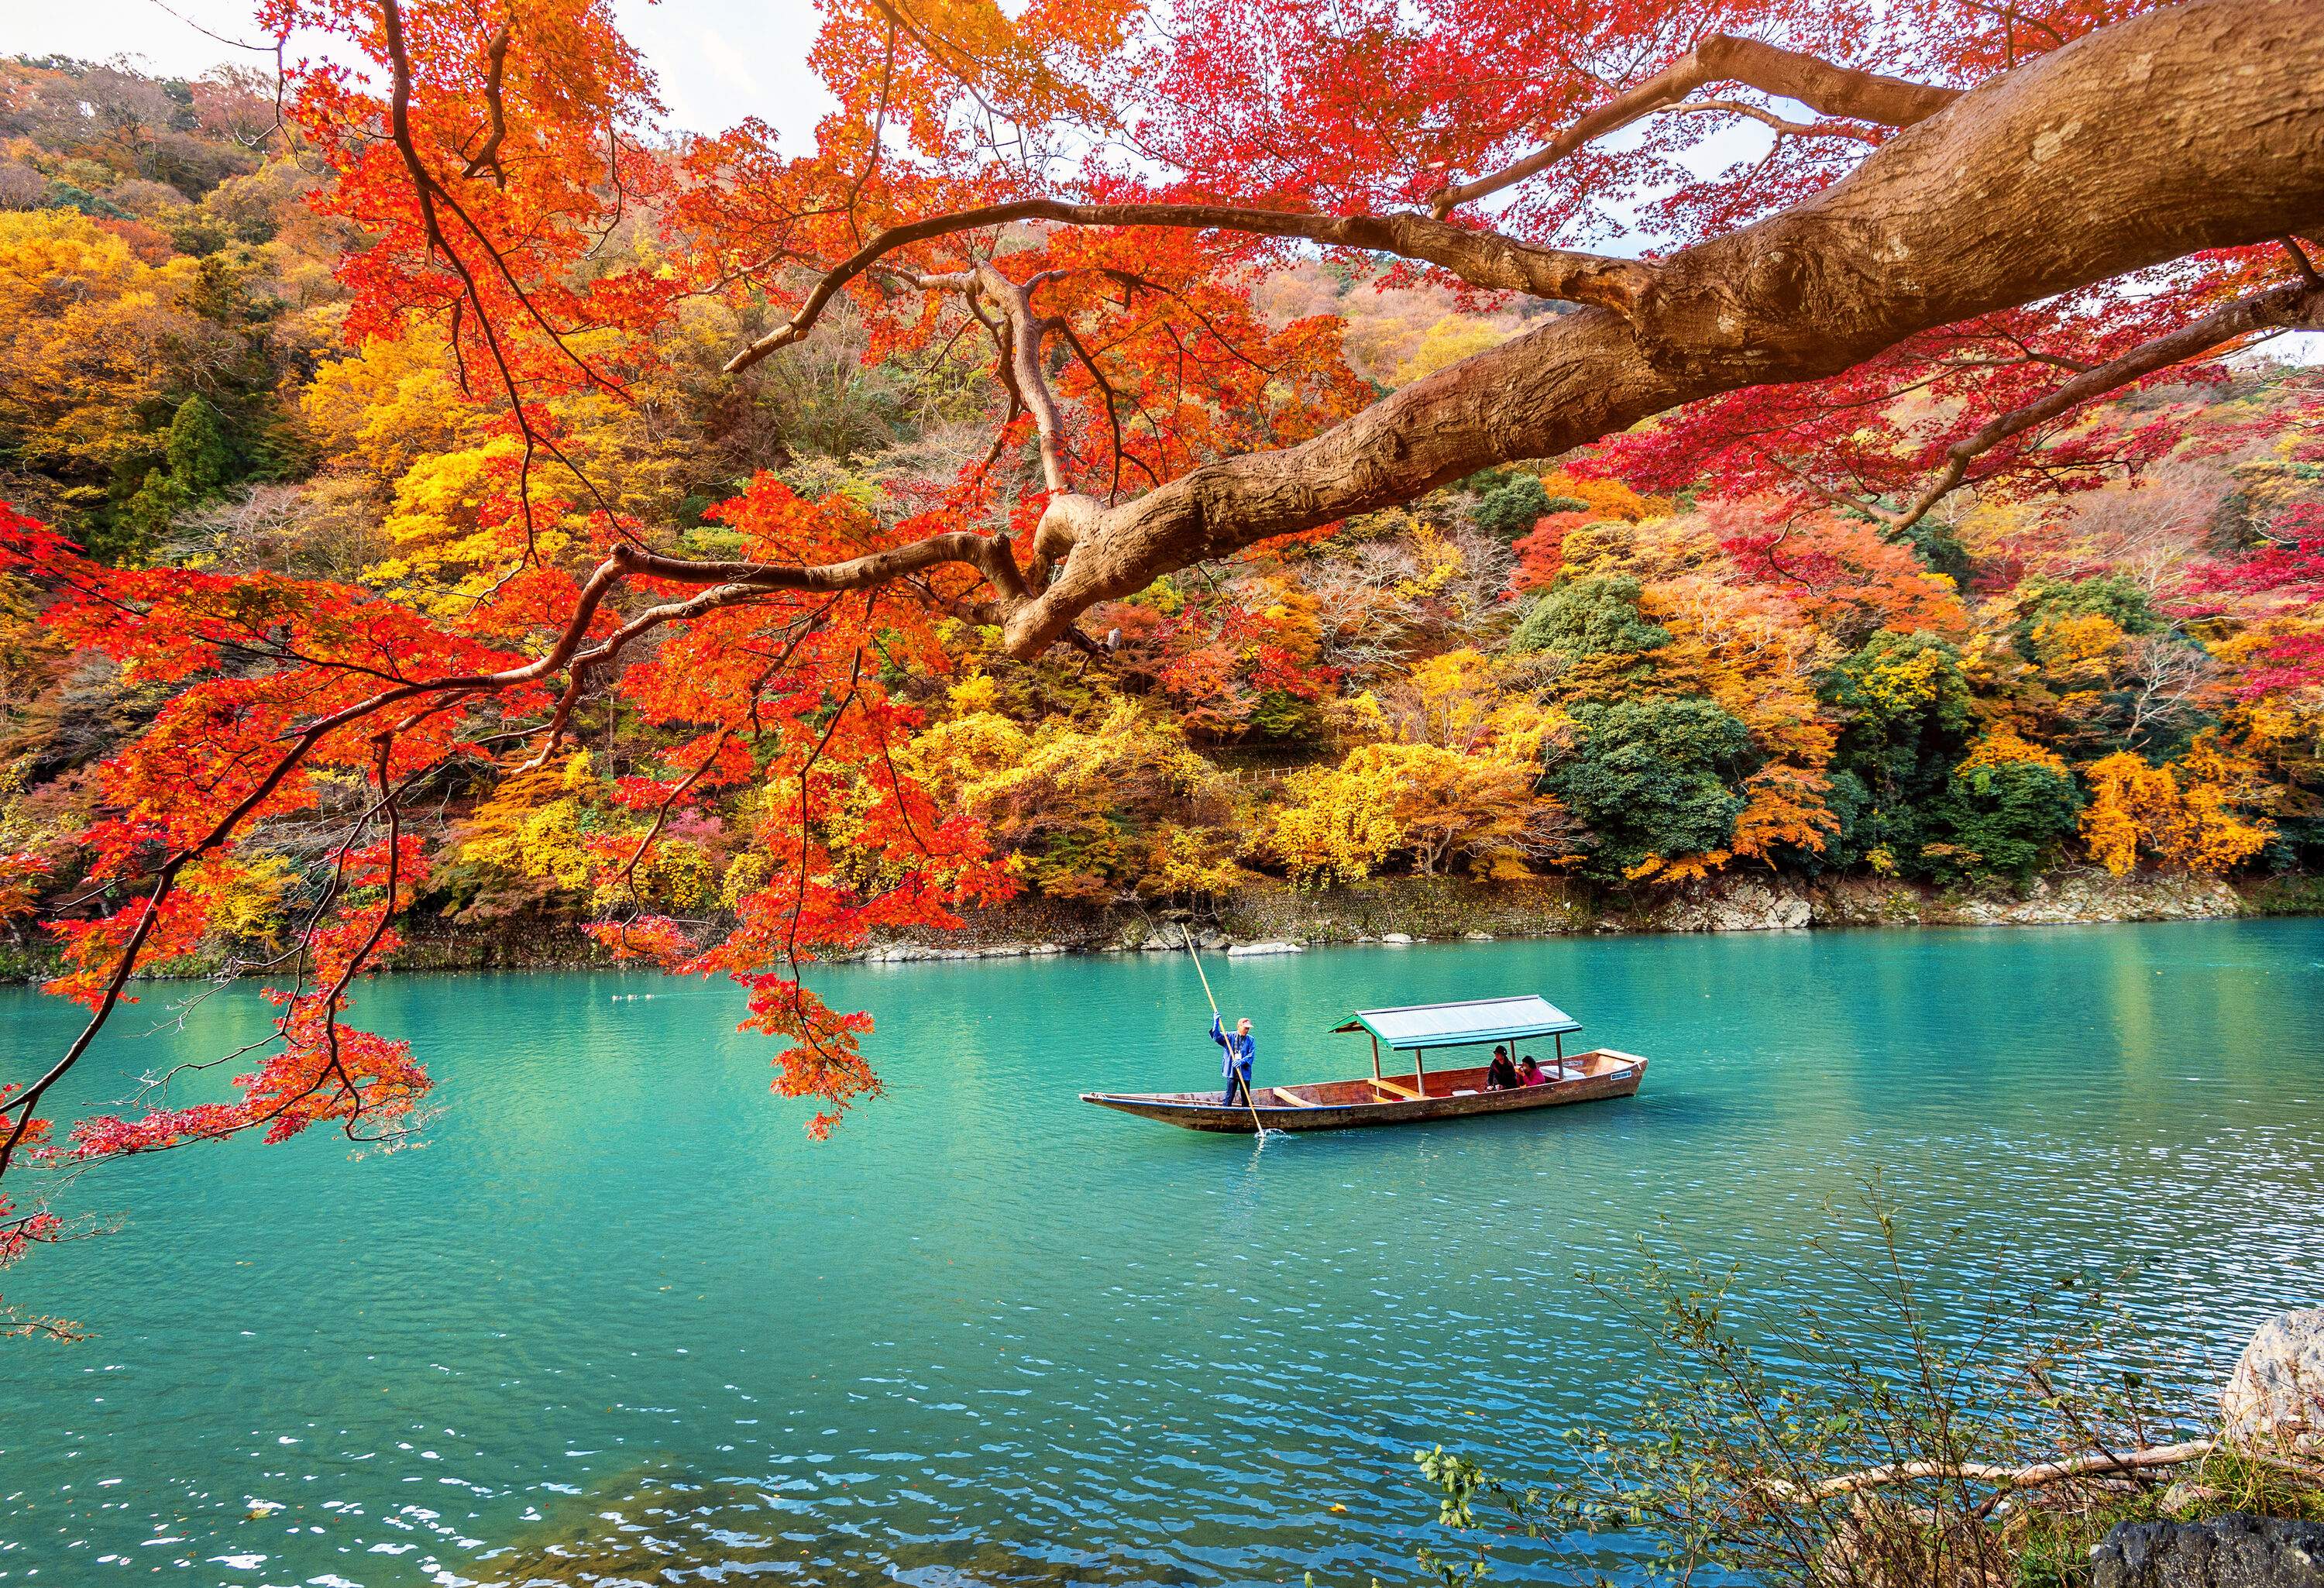 A man punting on turquoise waters with wildly coloured trees around the river.